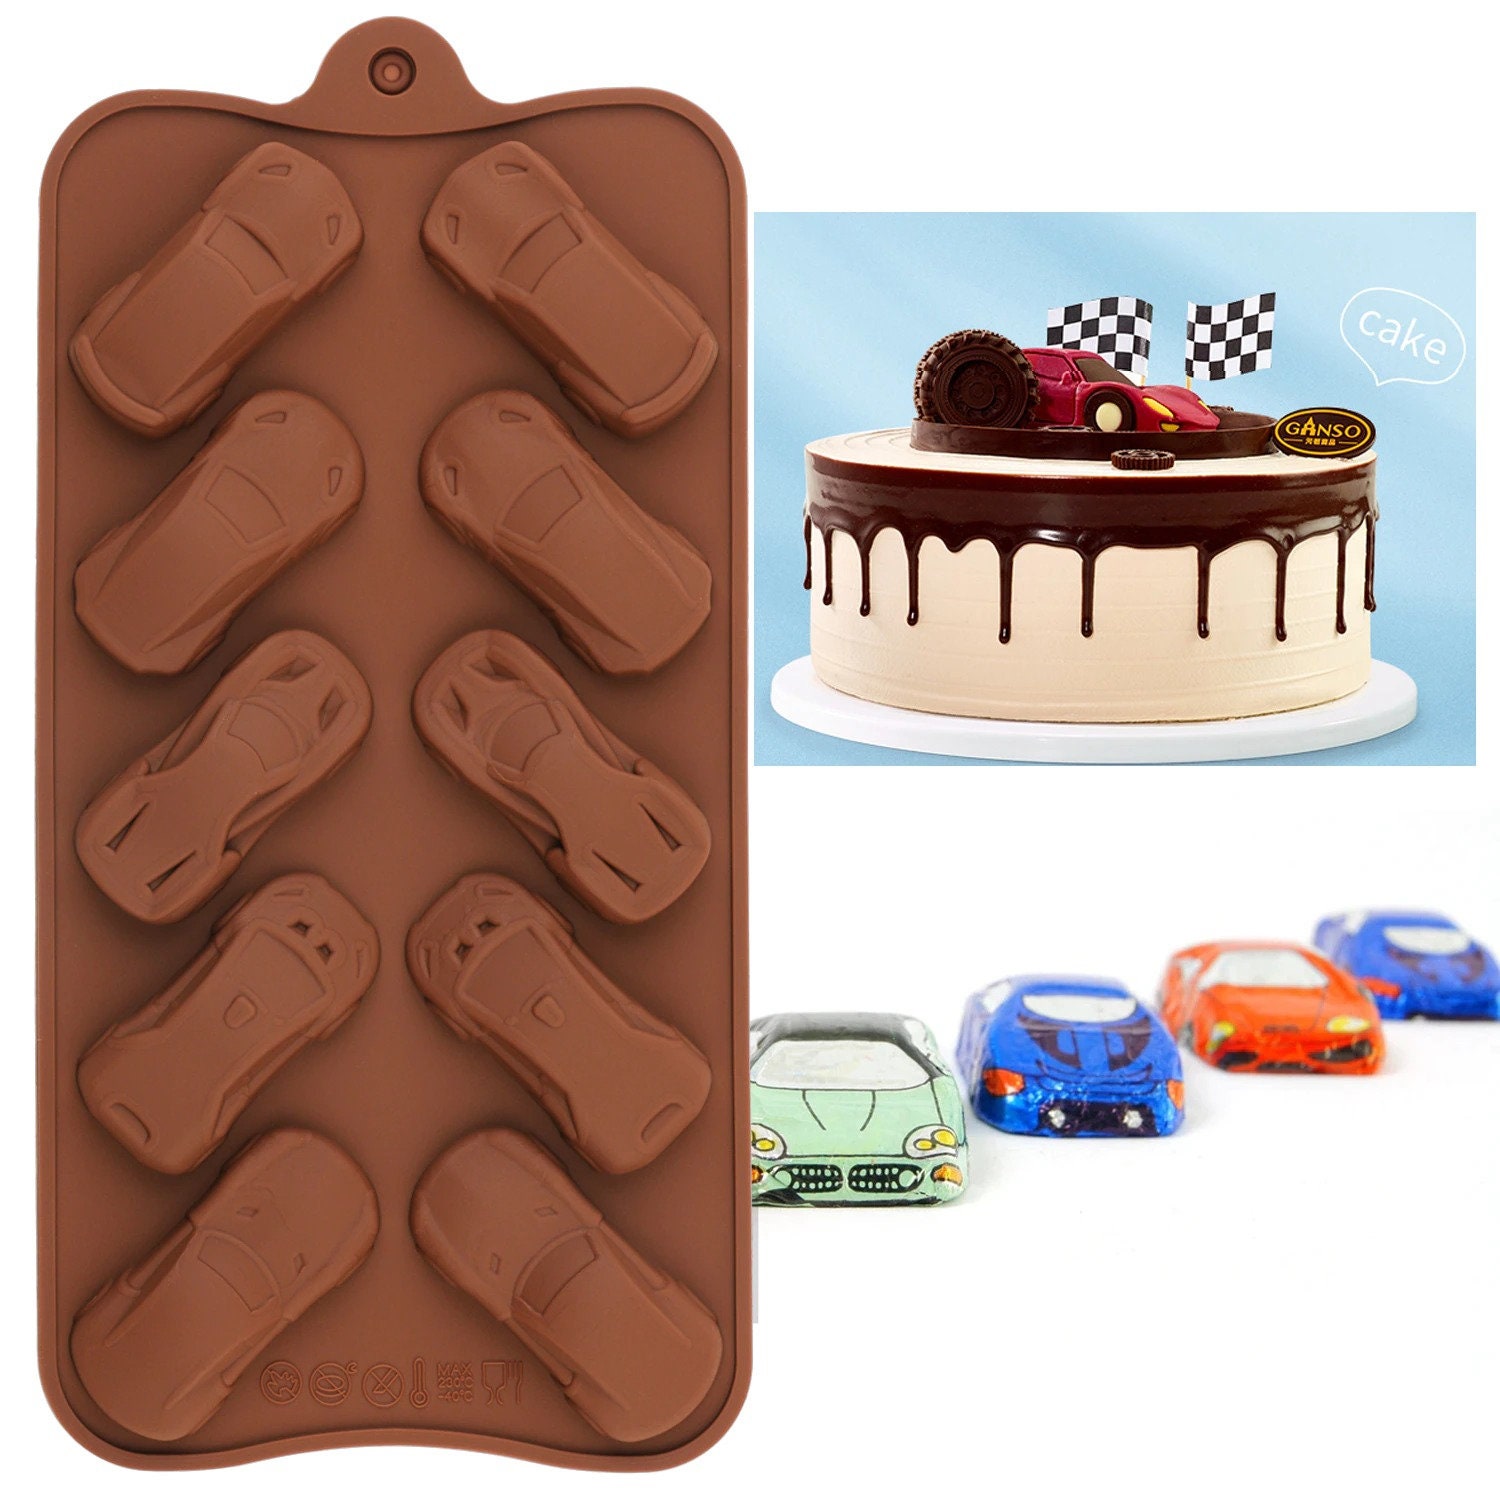 6Pcs Car Silicone Molds Cars Shape Chocolate Candy Molds Jello Mold for  Kids Cute Race Car Mold for Making Handmade Cake - pink 